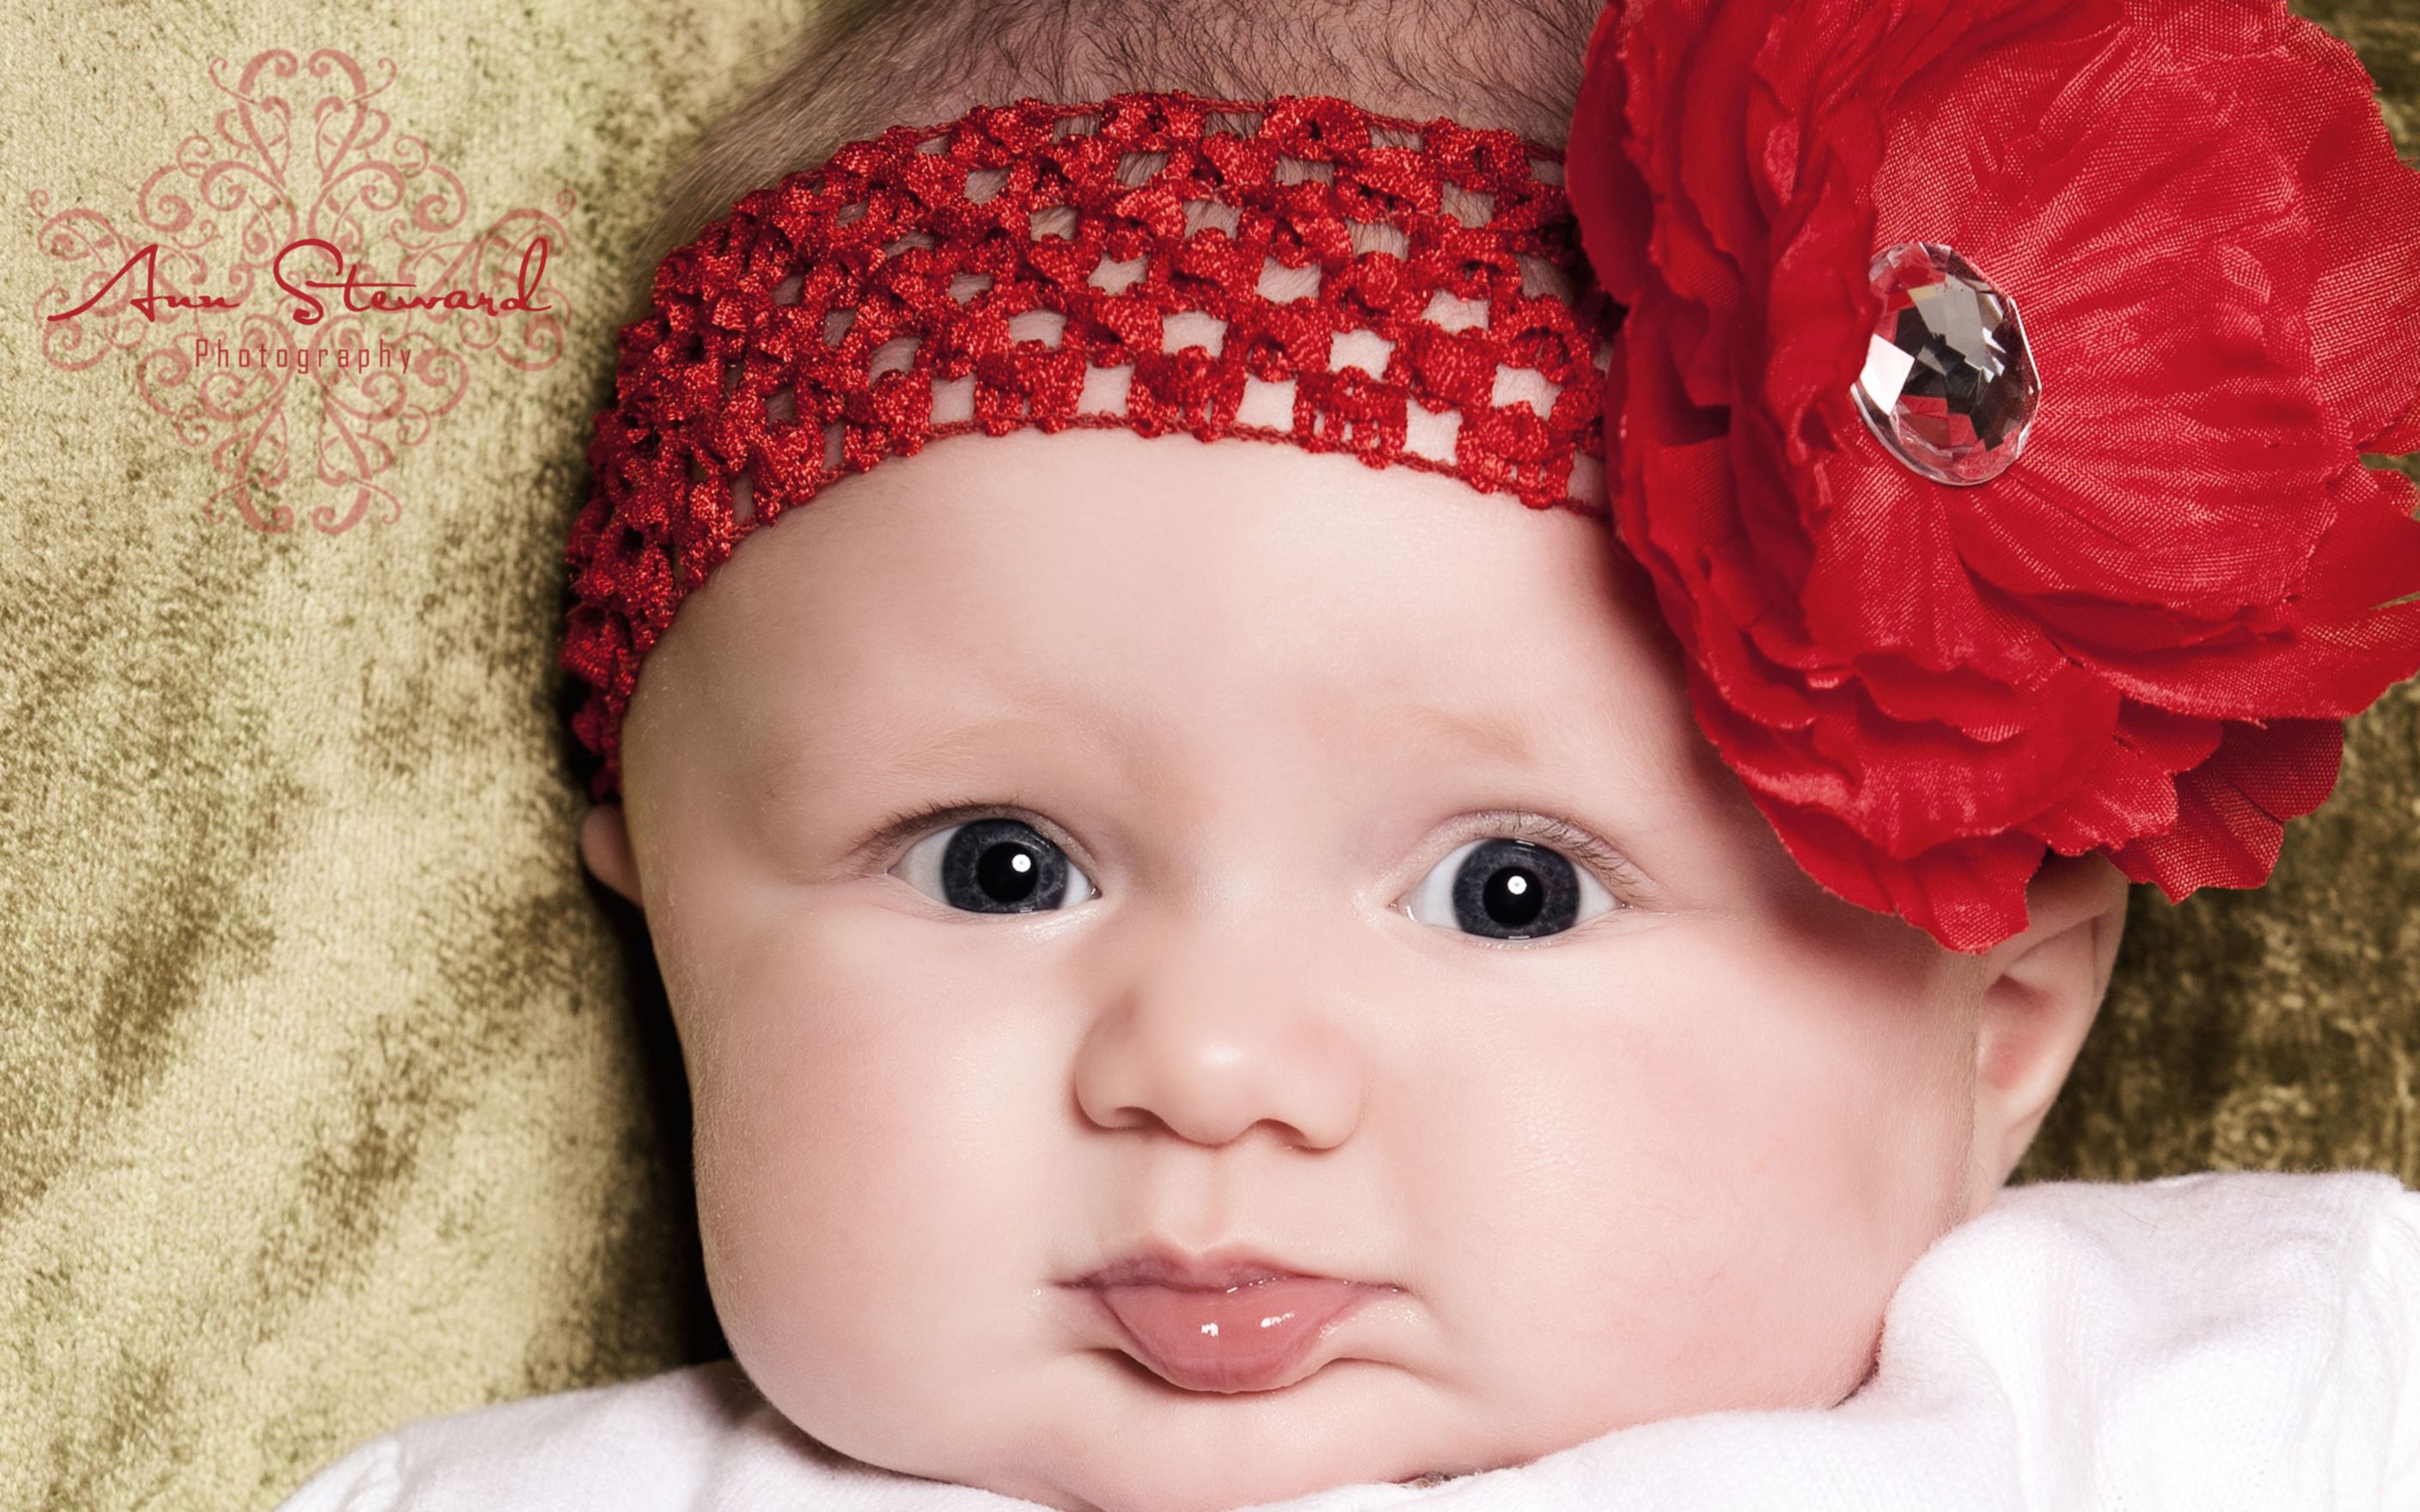 Pictures Of Little Babies - Baby Photos Free Download - HD Wallpaper 